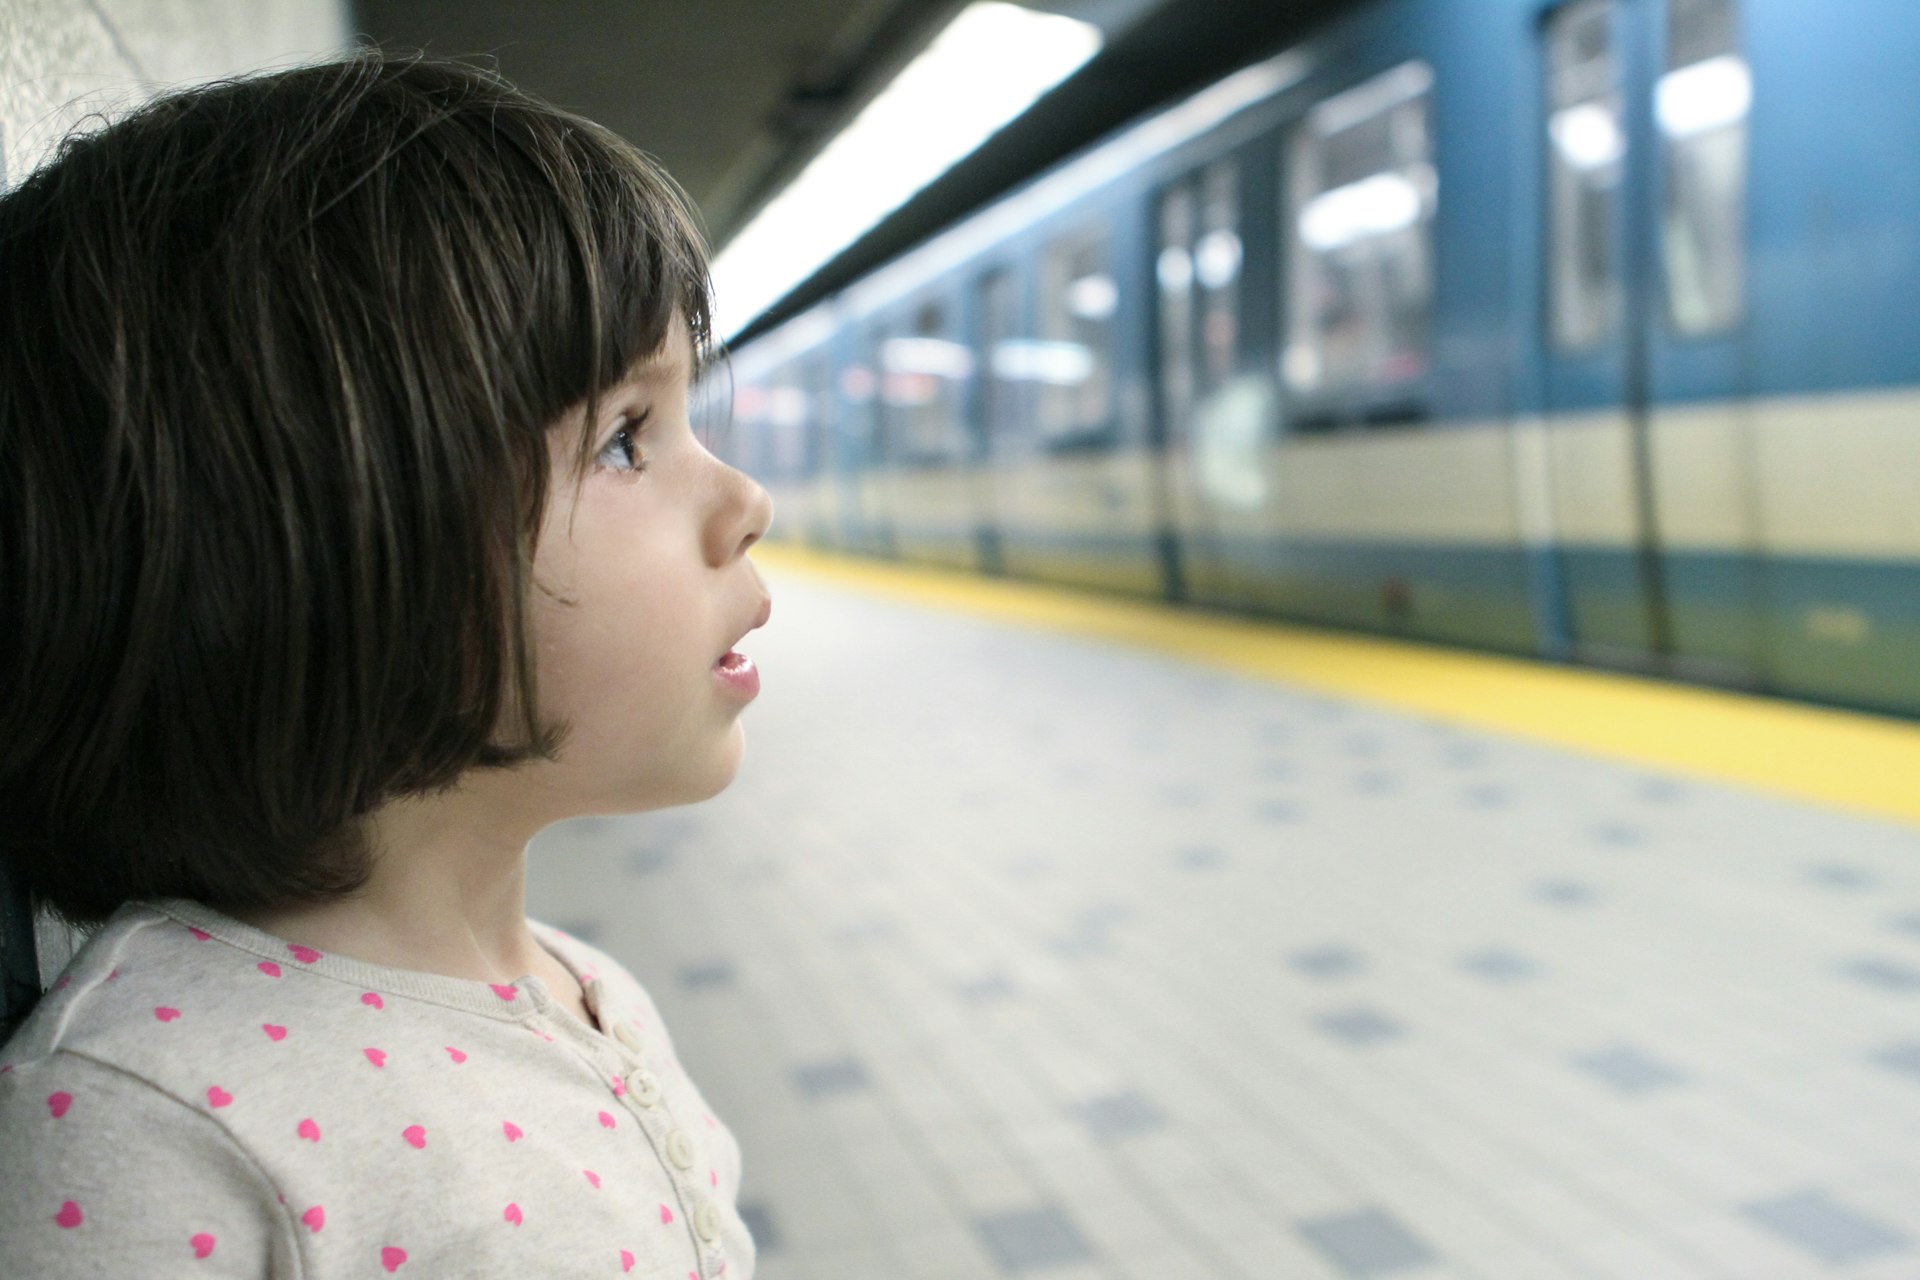 A girl looks at a metro train in a station in Montréal, Québec, Candada